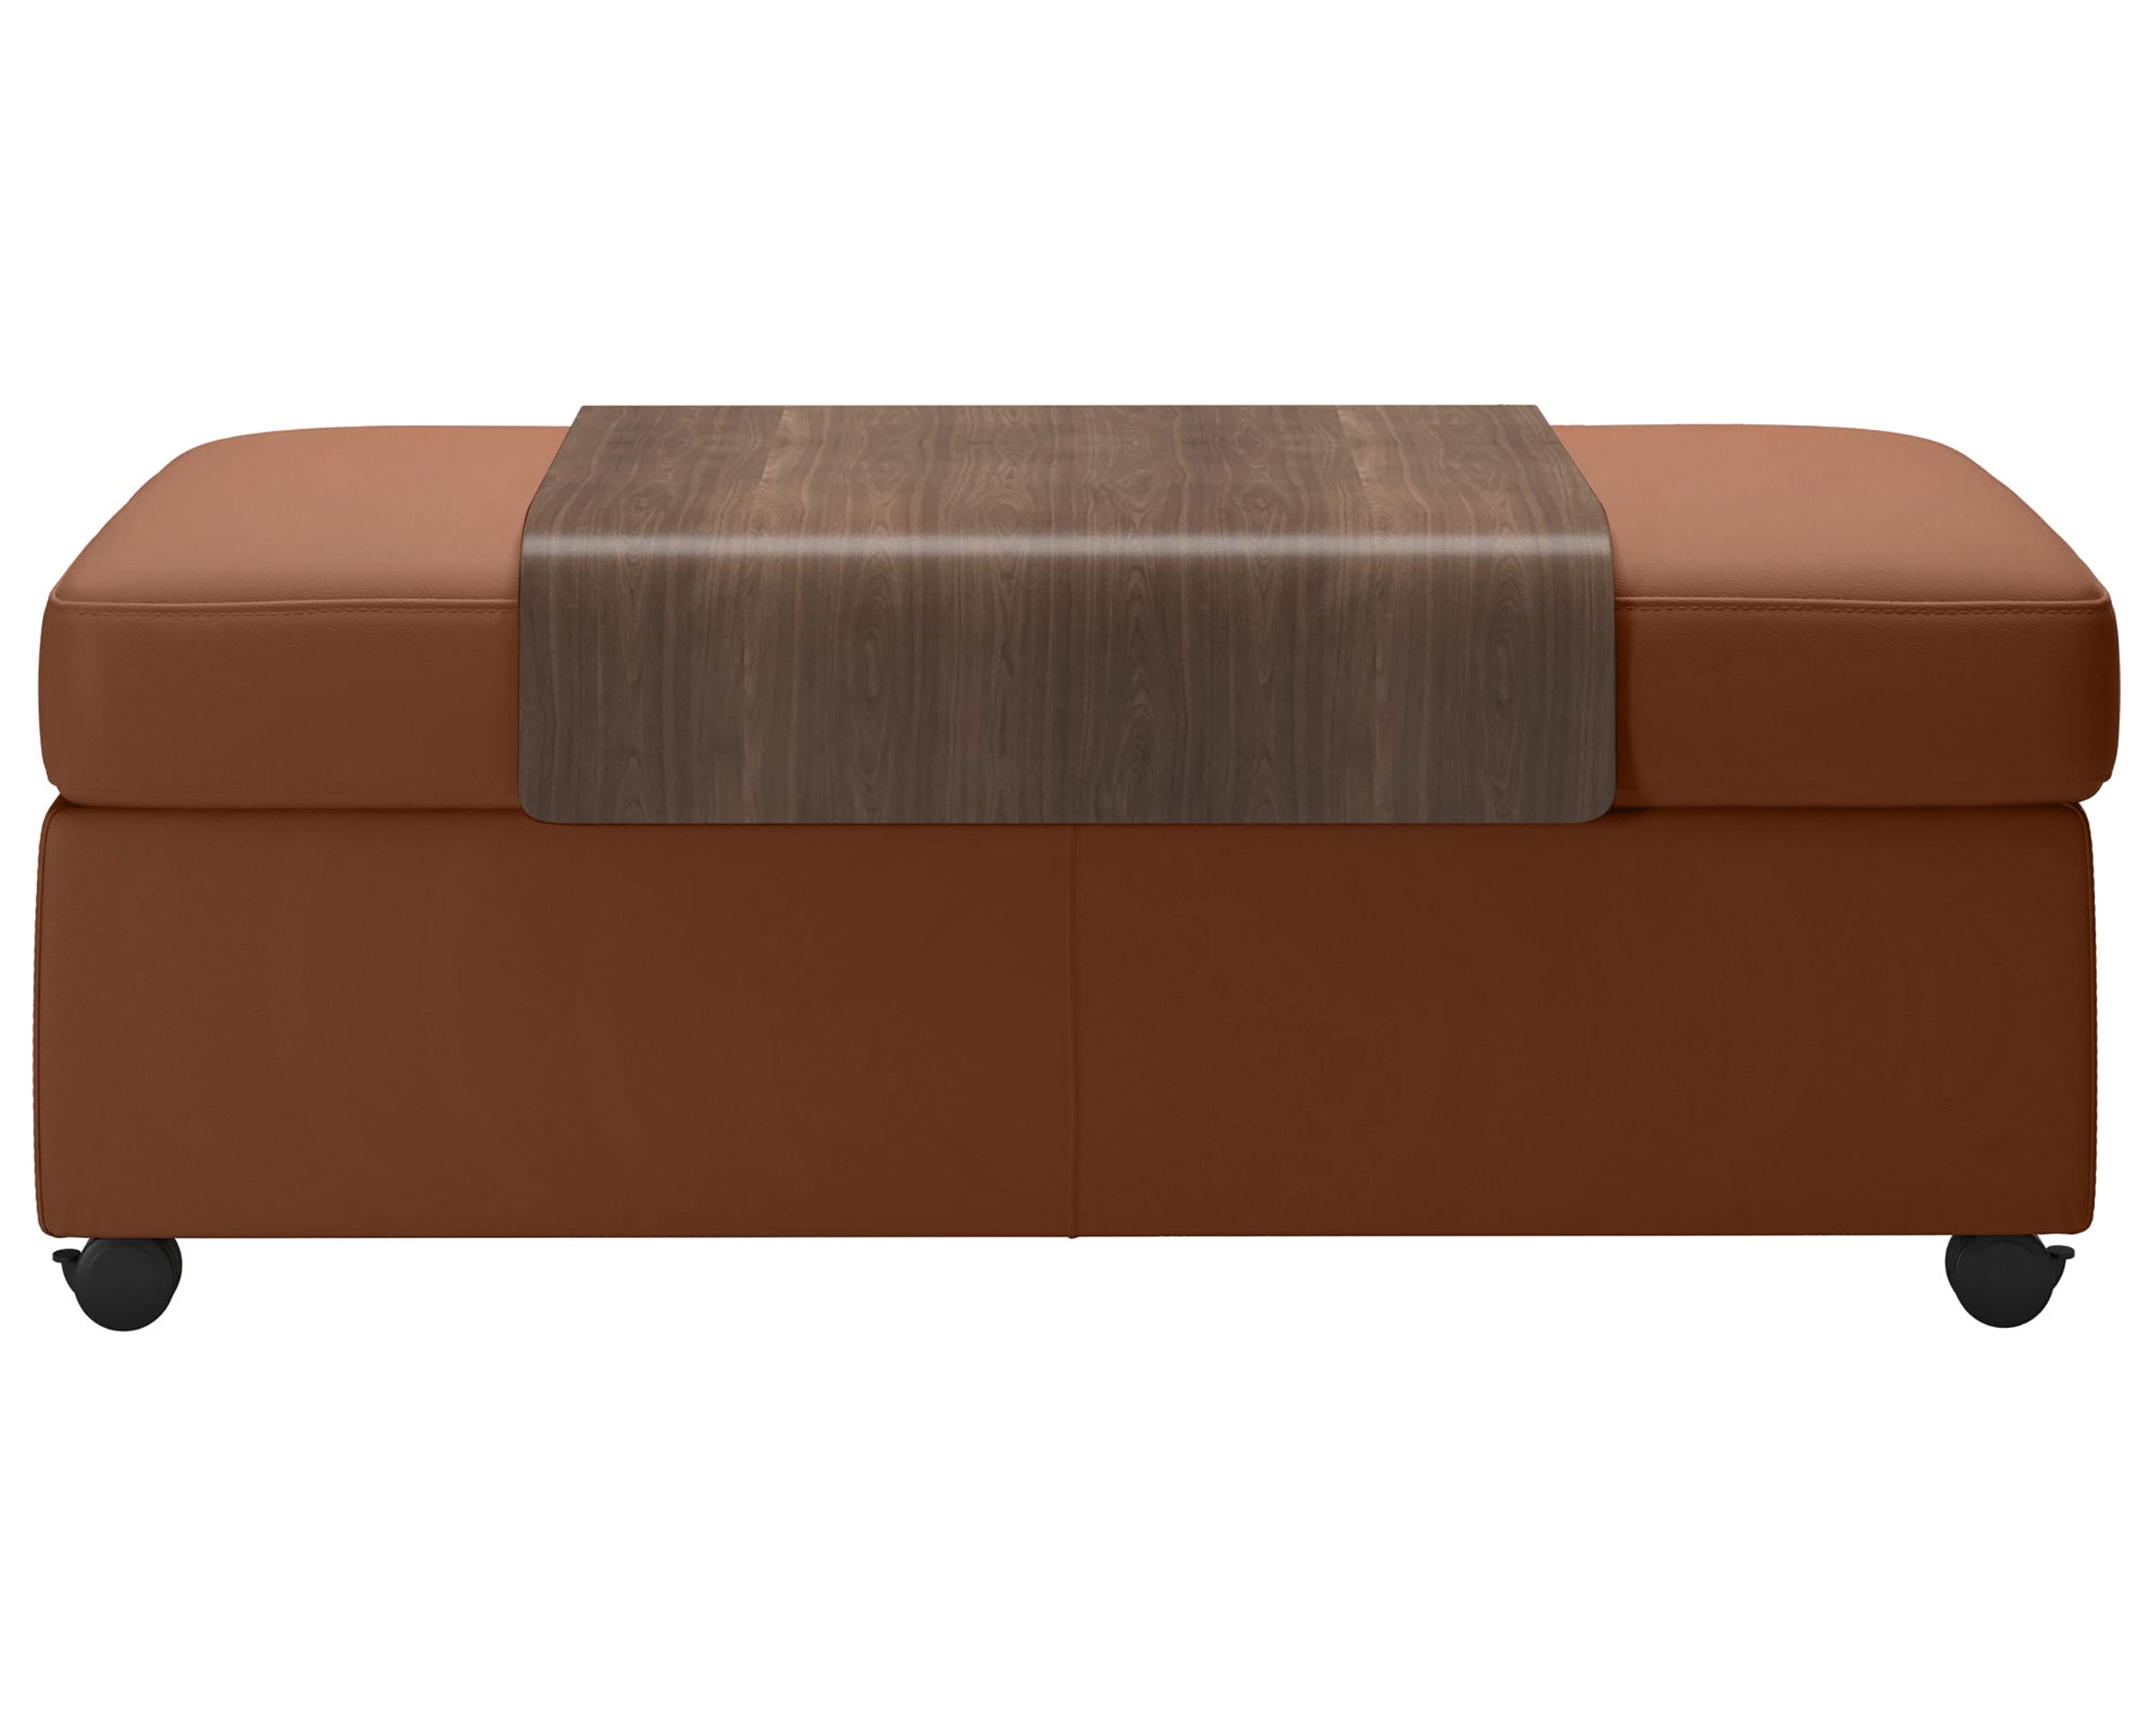 Paloma Leather New Cognac and Walnut Finish | Stressless Double Ottoman with Table | Valley Ridge Furniture